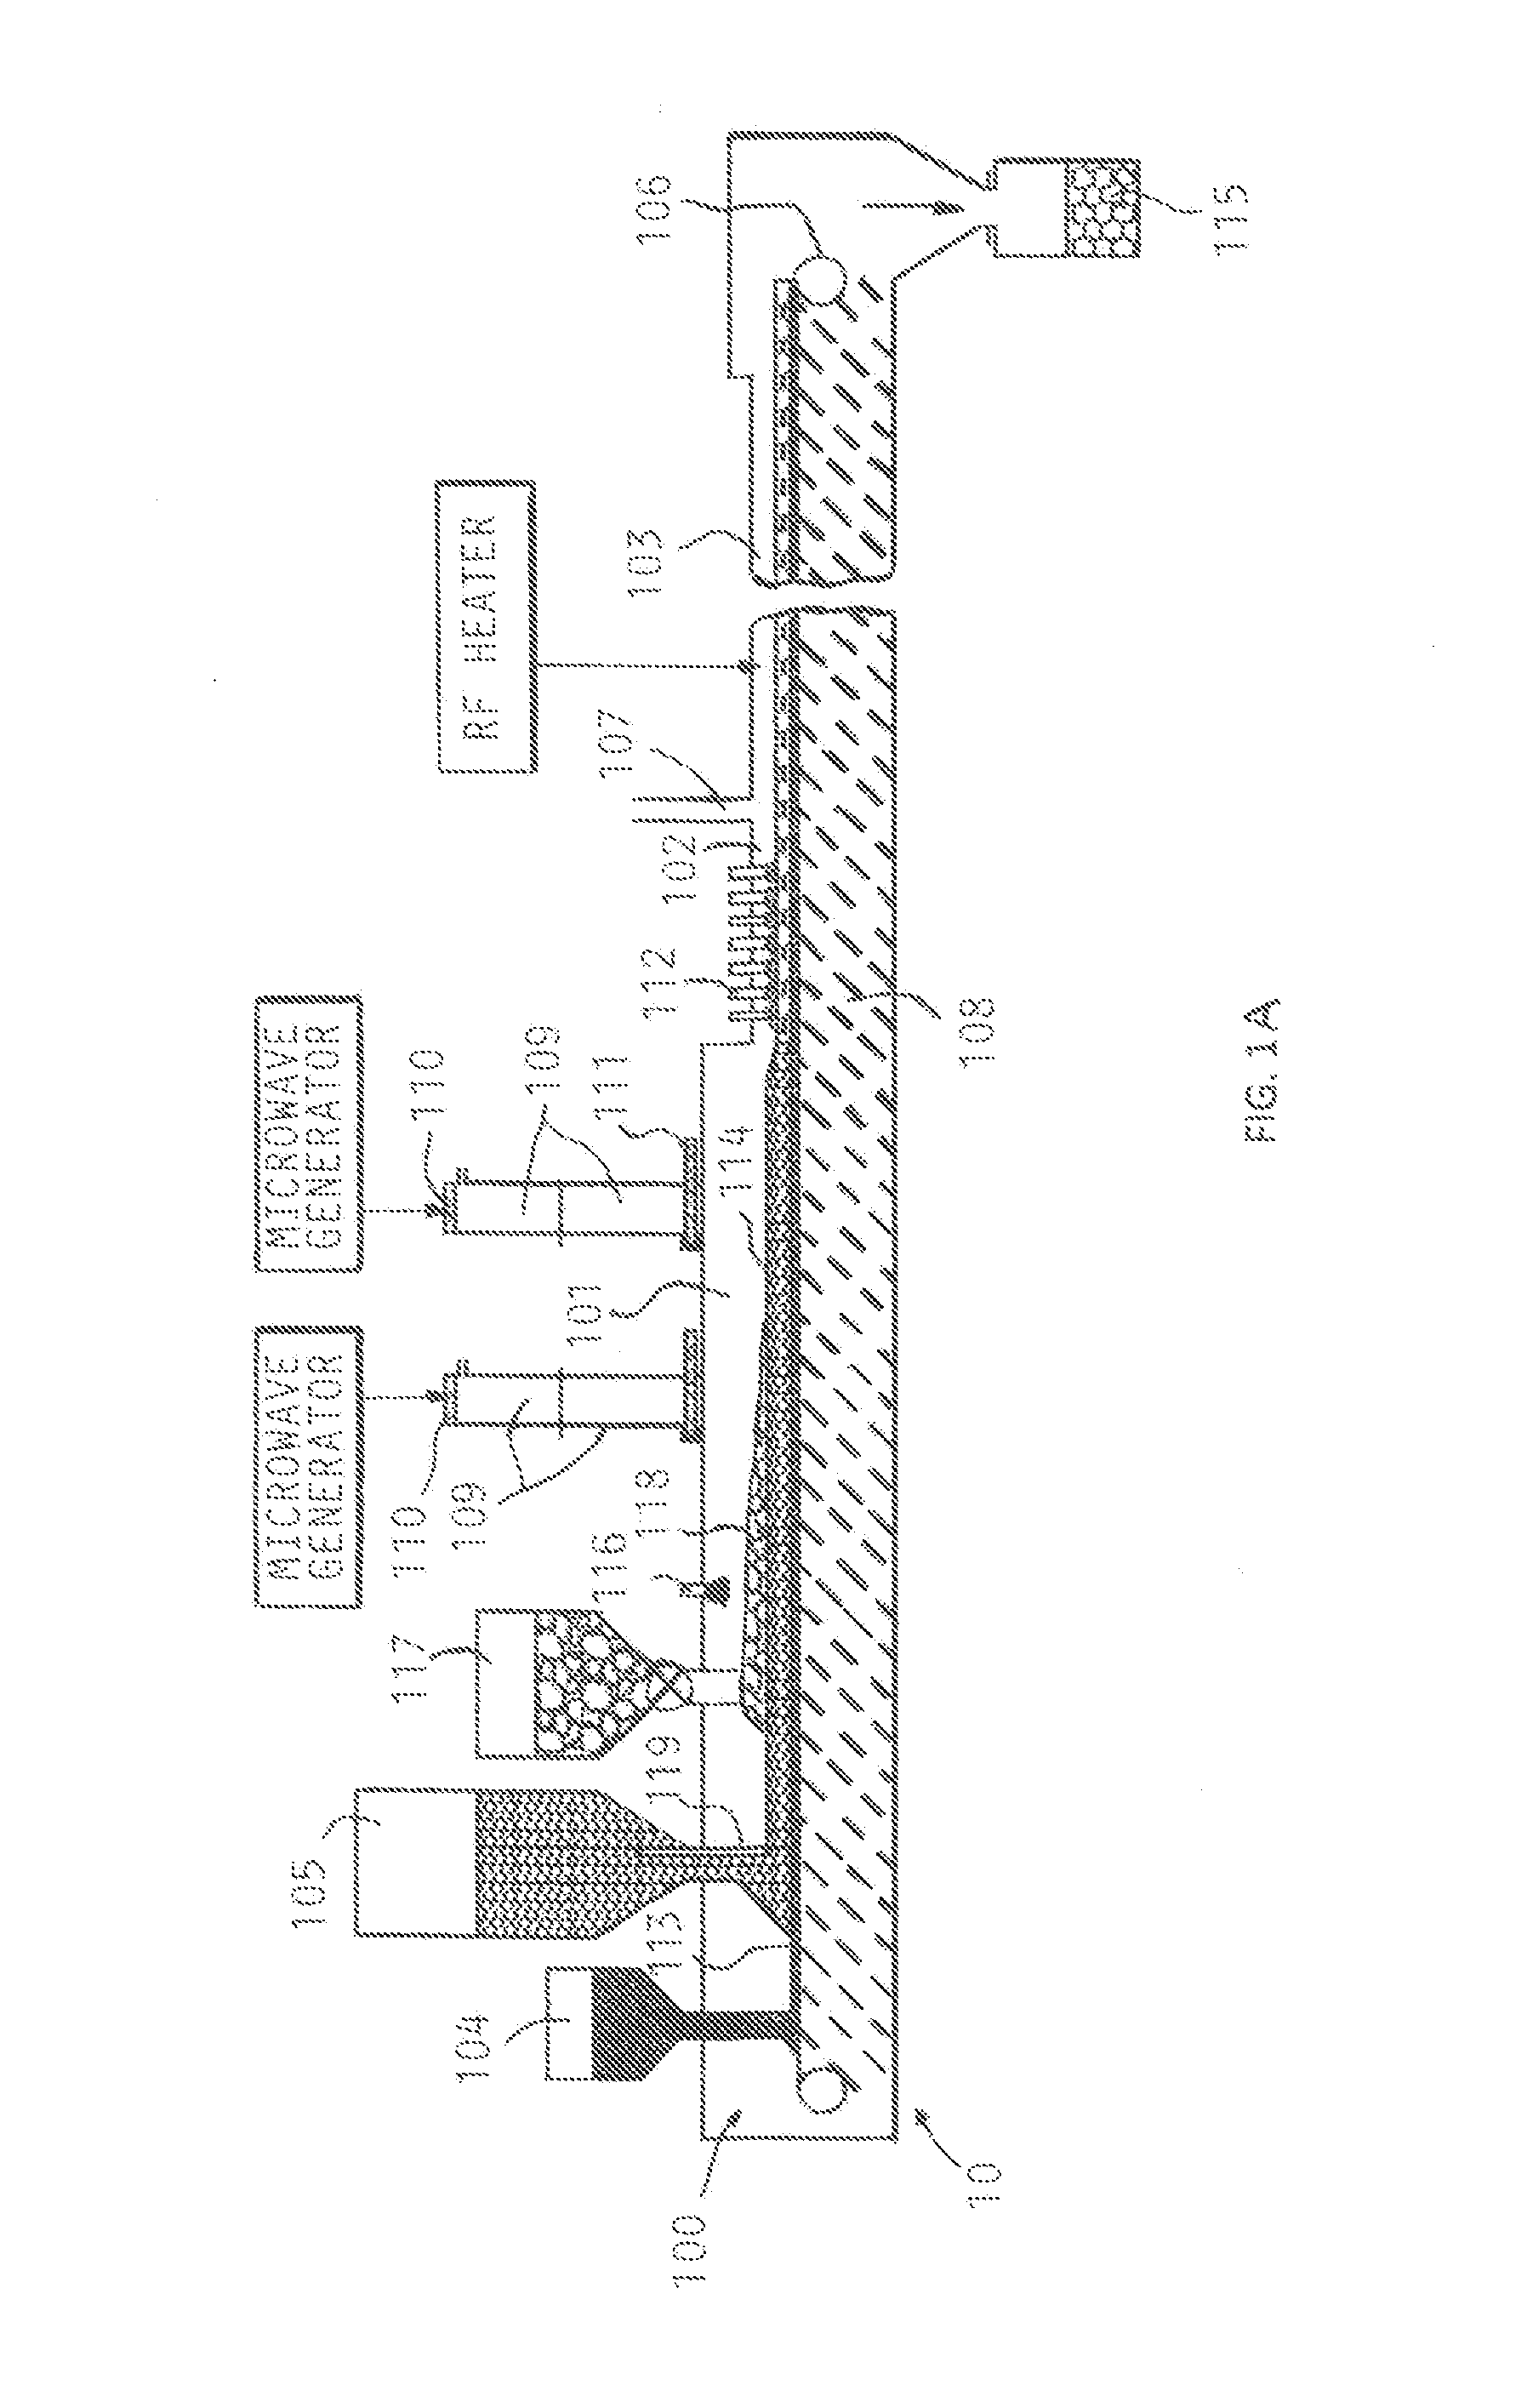 Method and apparatus for coproduction of pig iron and high quality syngas